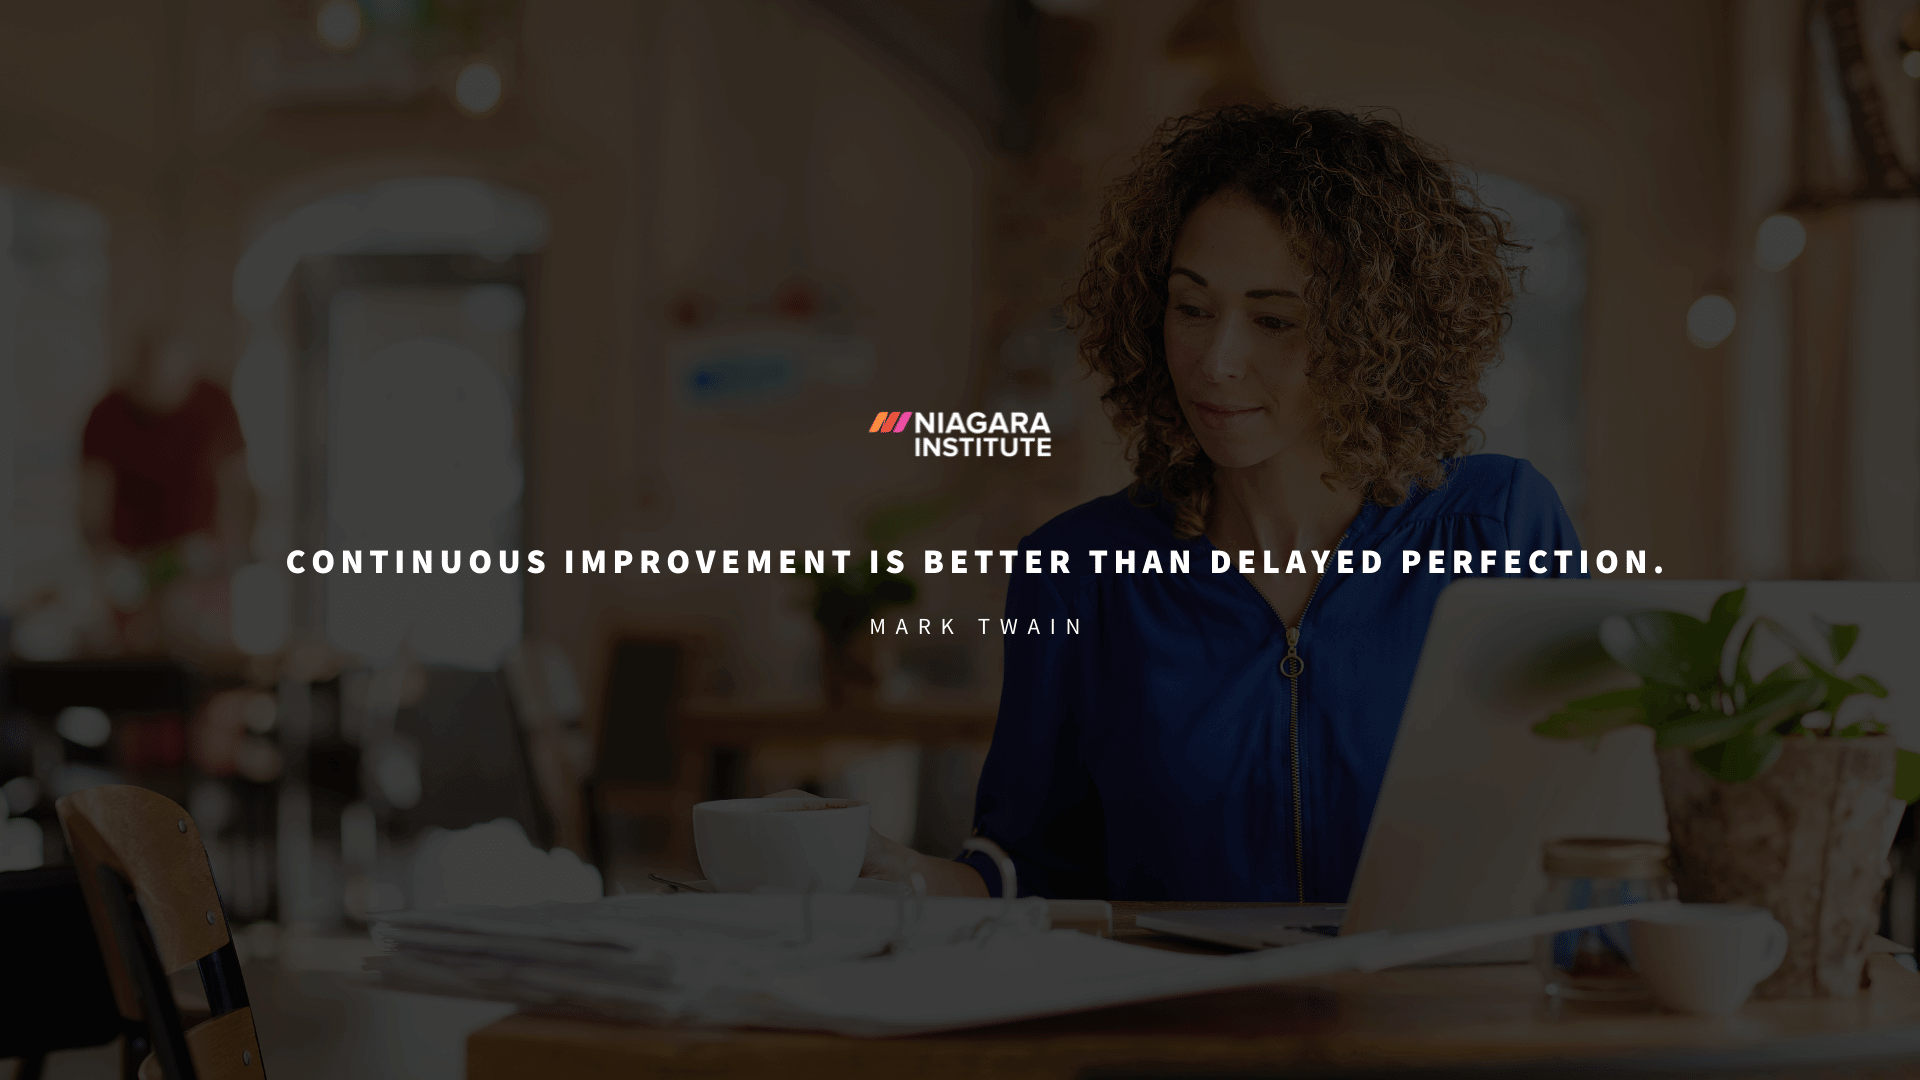 Quotes About Improving Processes | Continuous improvement is better than delayed perfection